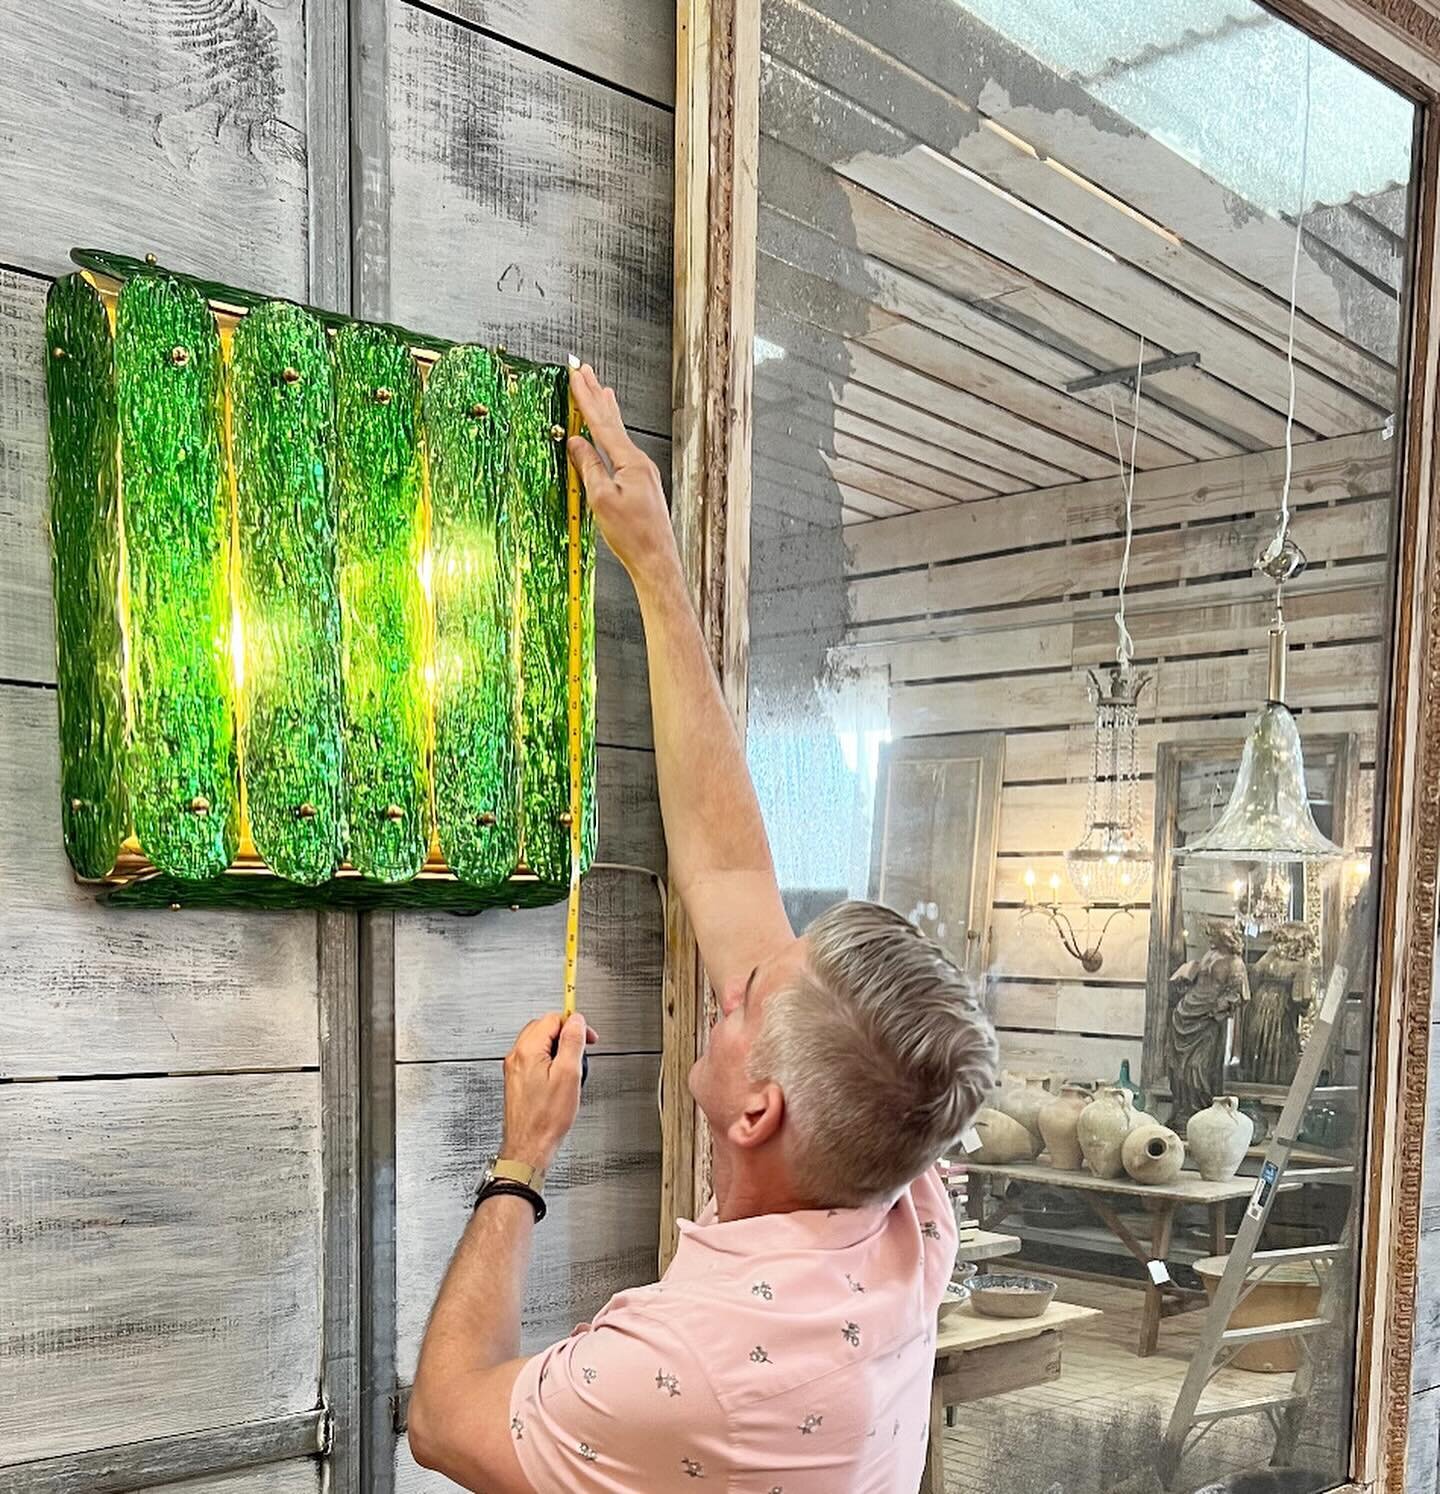 One of a kind searching - you never know what you will find #roundtopantiqueshow - from rustic to early fine European pieces - An array of style options for all in Roundtop TX!

#antiqueshopping #roundtop #texasantiques #muranolighting #greenmohair #